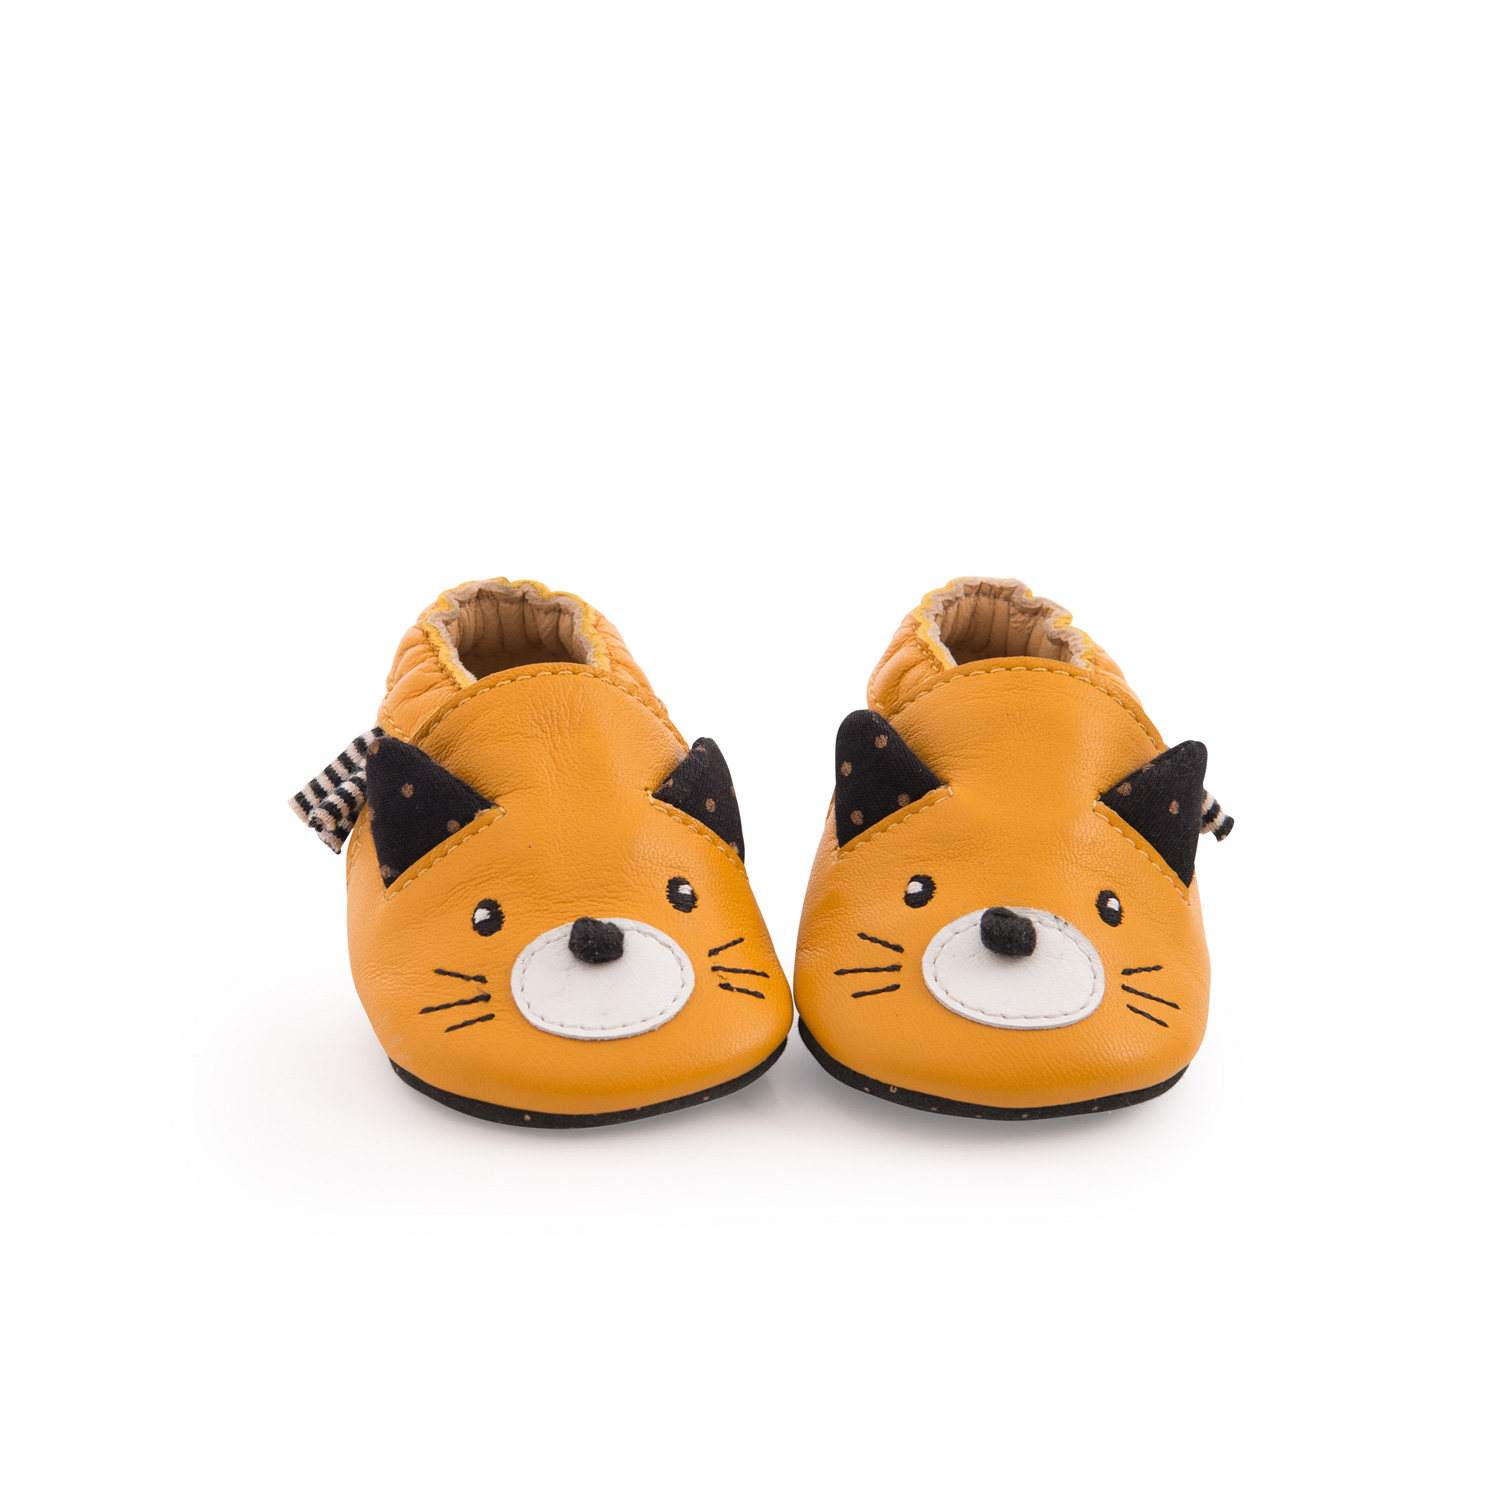 Chaussons cuir moutarde chat les Moustaches 18/24 mois Moulin Roty